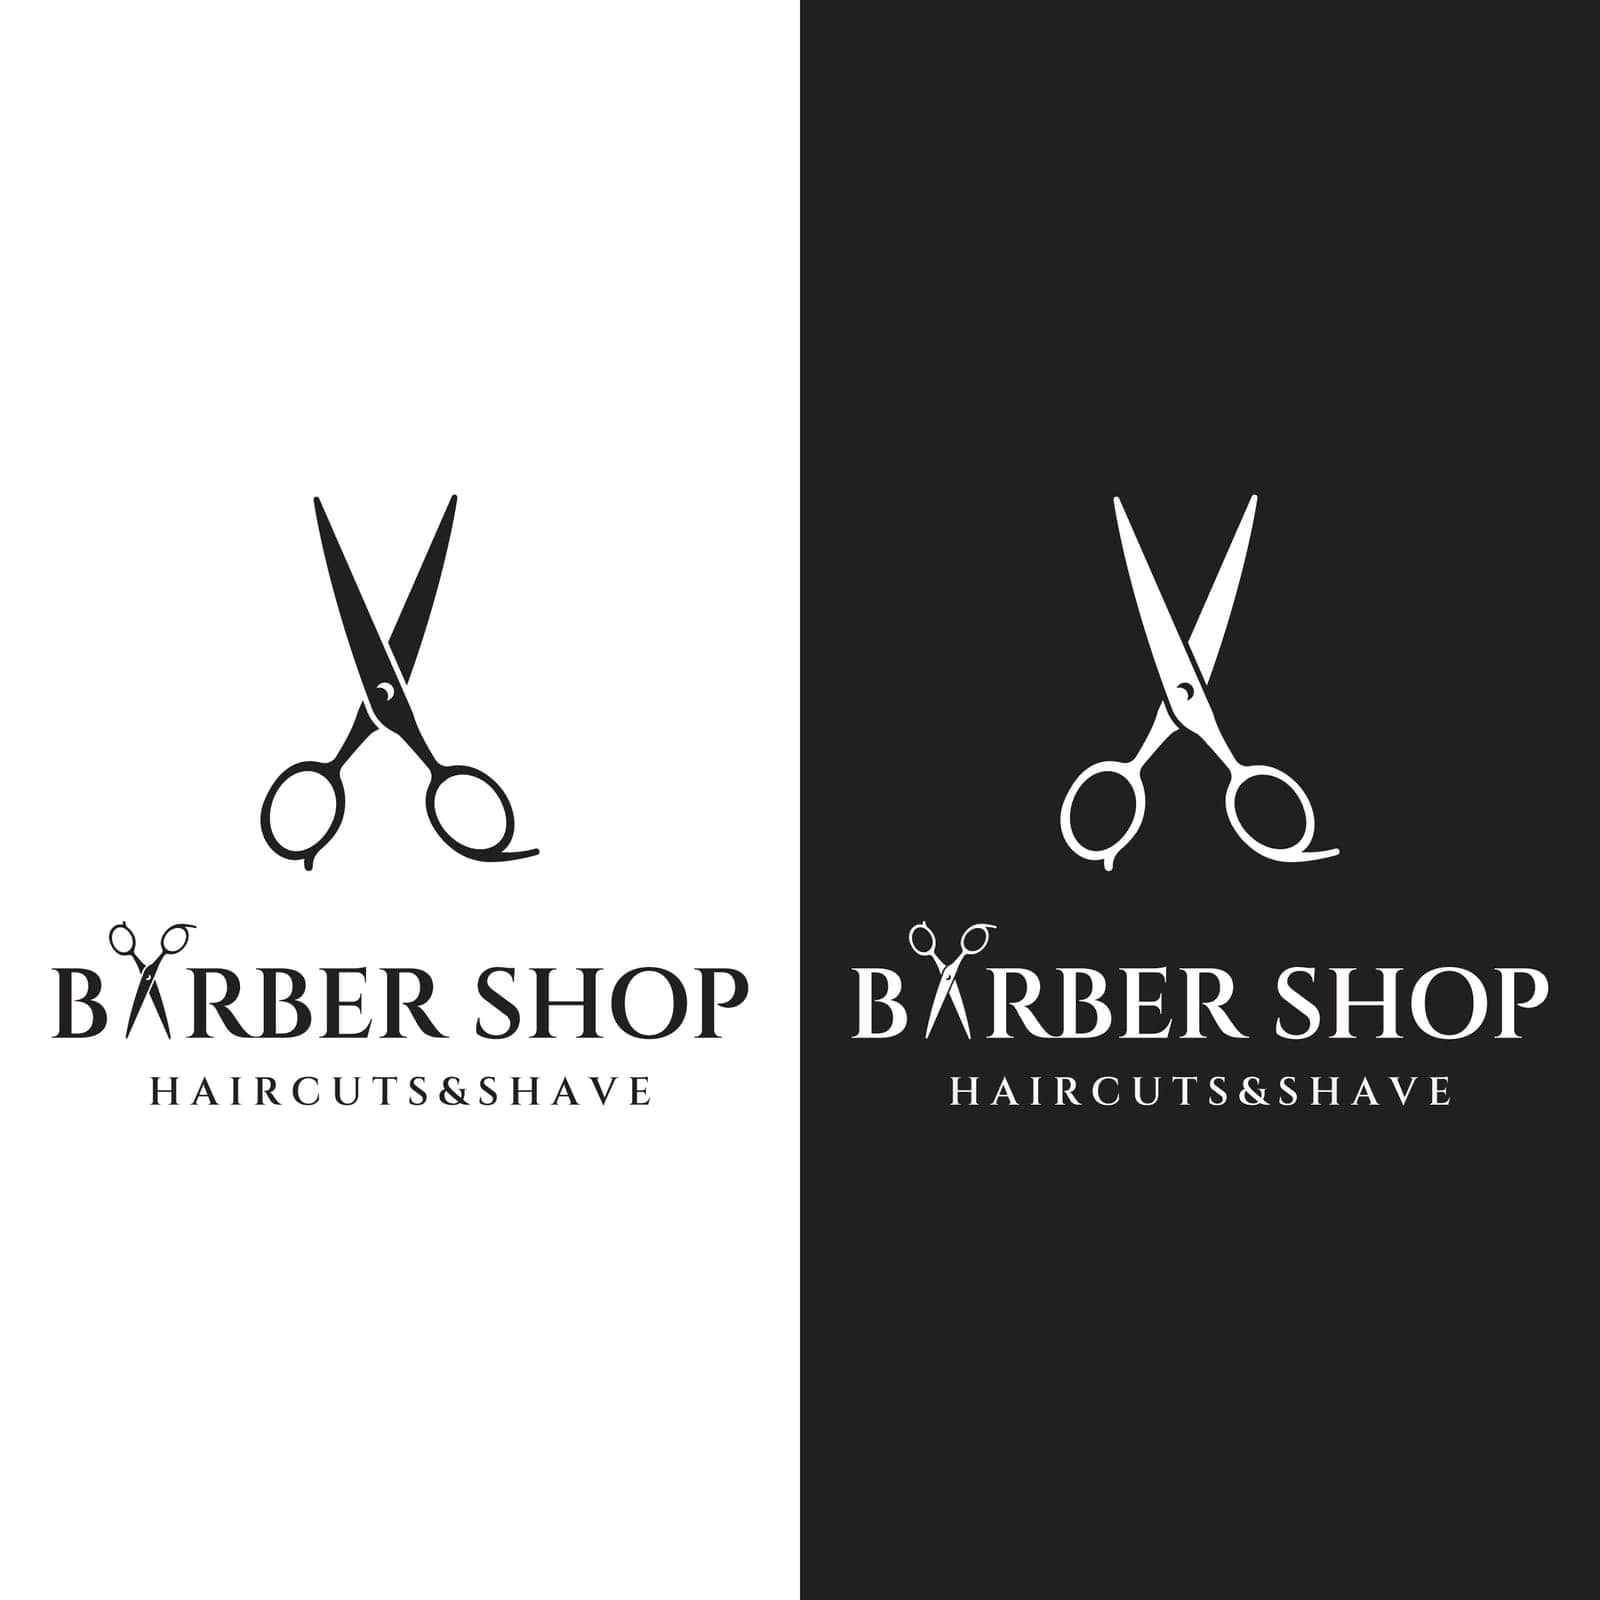 Creative and simple classic haircut salon scissors template Logo design isolated on black and white background.For business, barbershop, salon, beauty. by Mrsongrphc